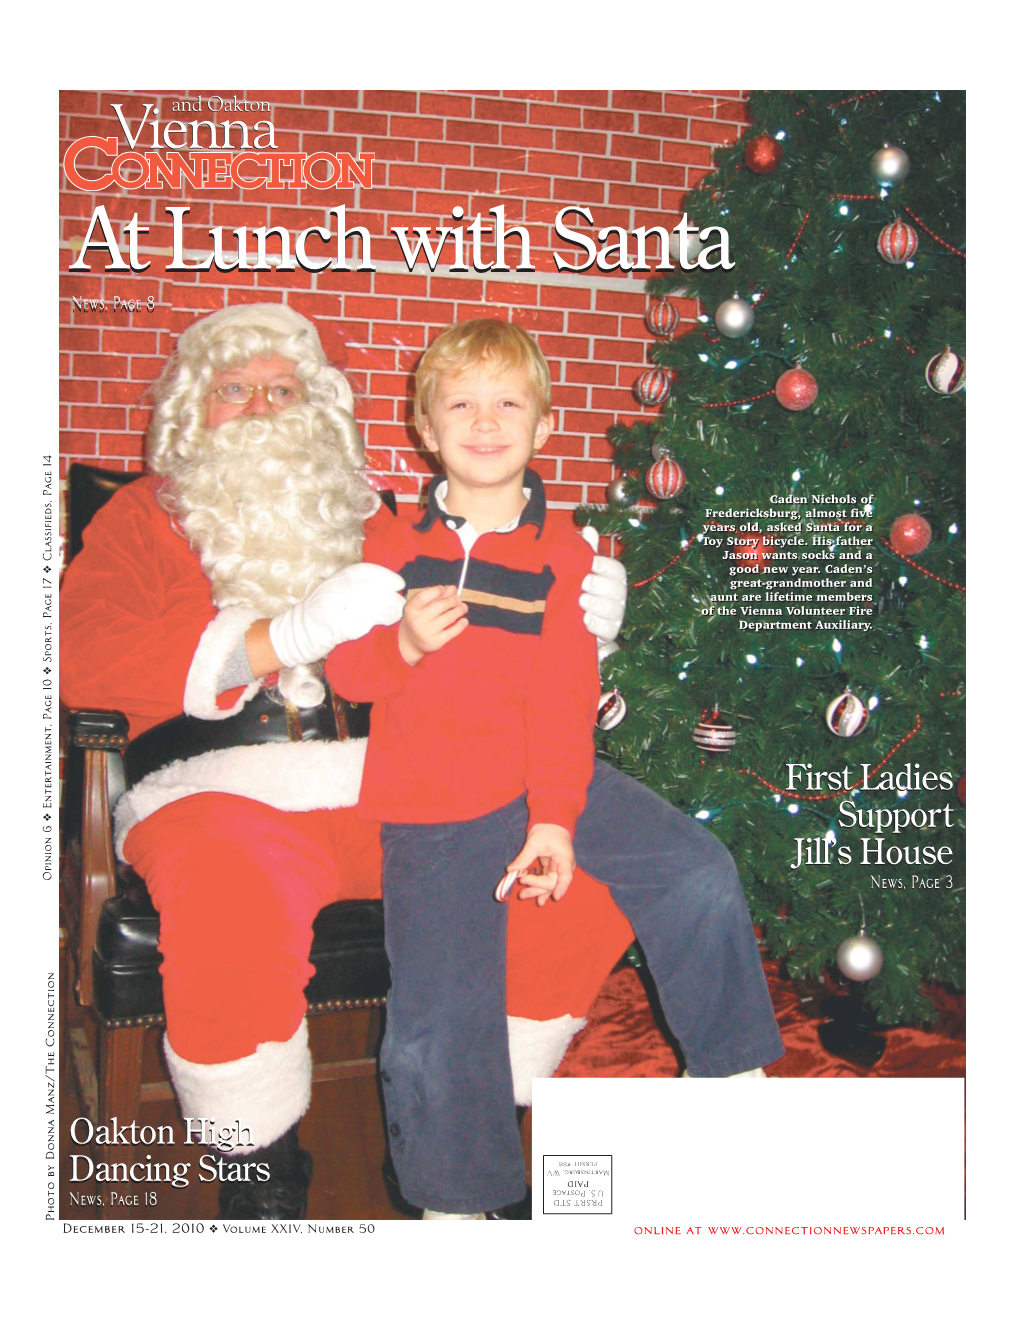 And Oakton at Lunch with Santa News, Page 8